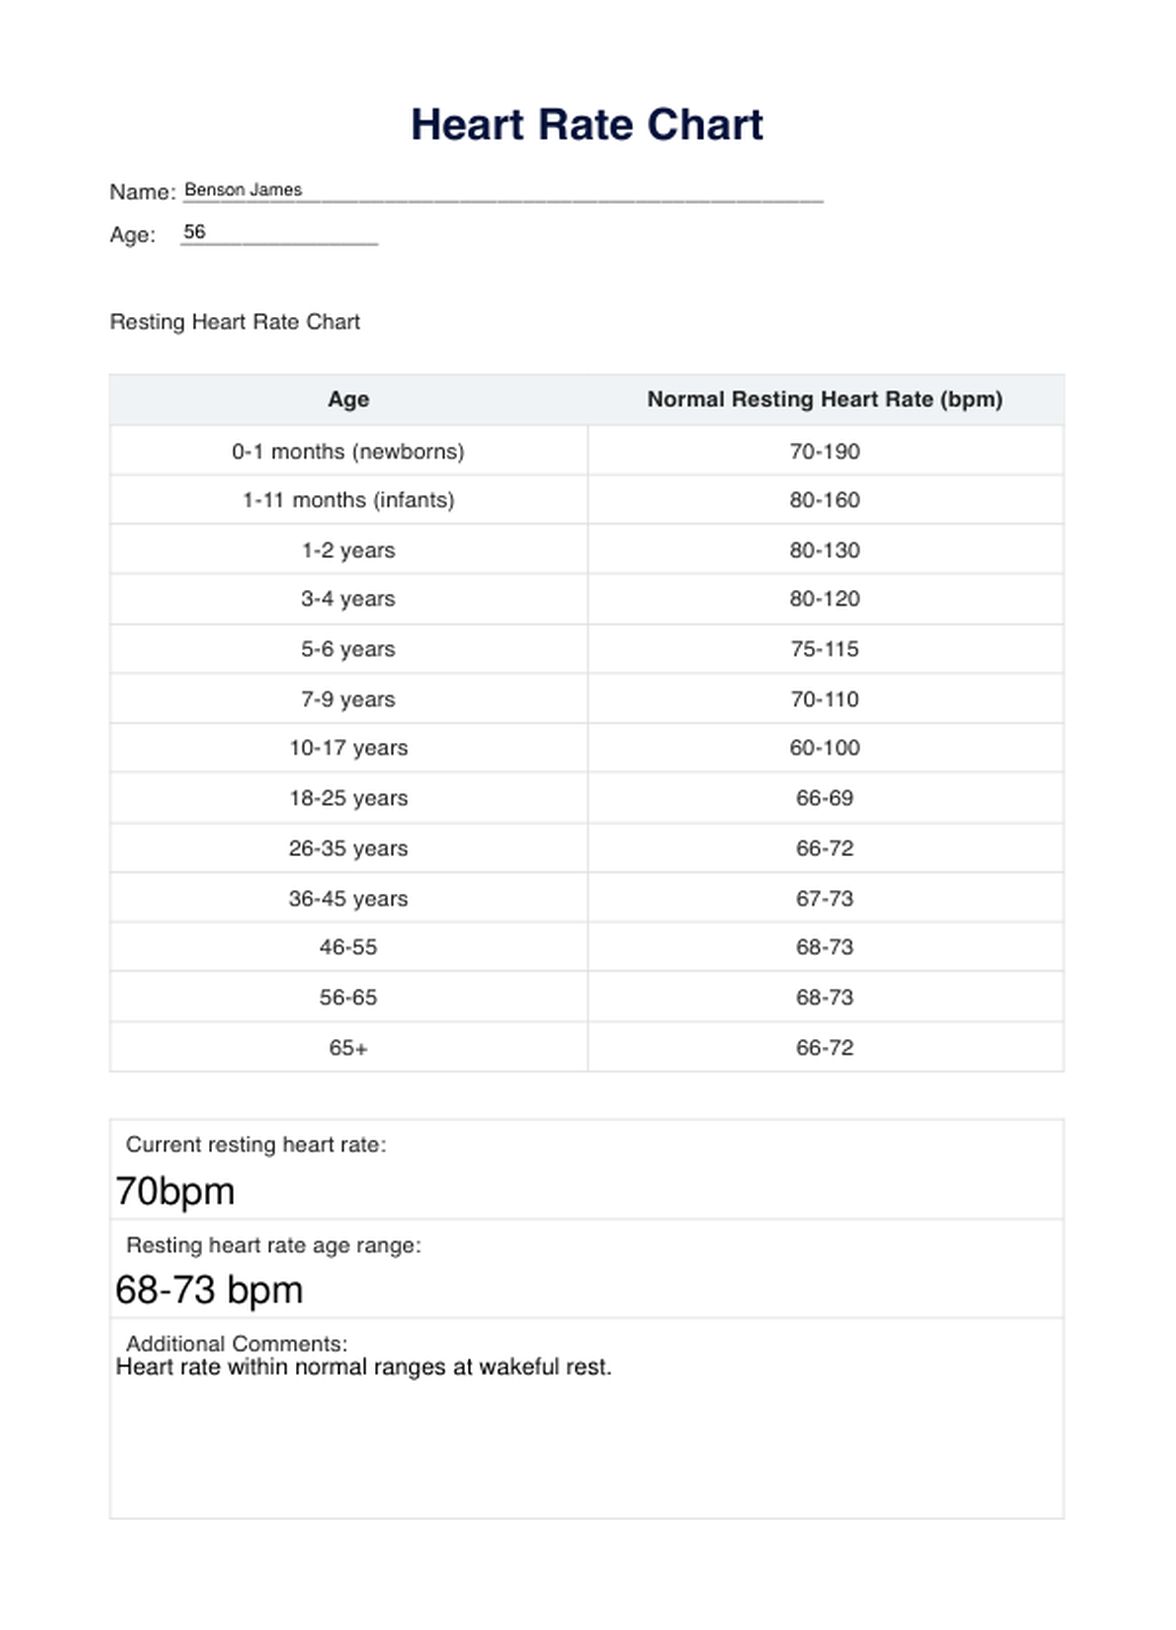 Heart Rate PDF Example